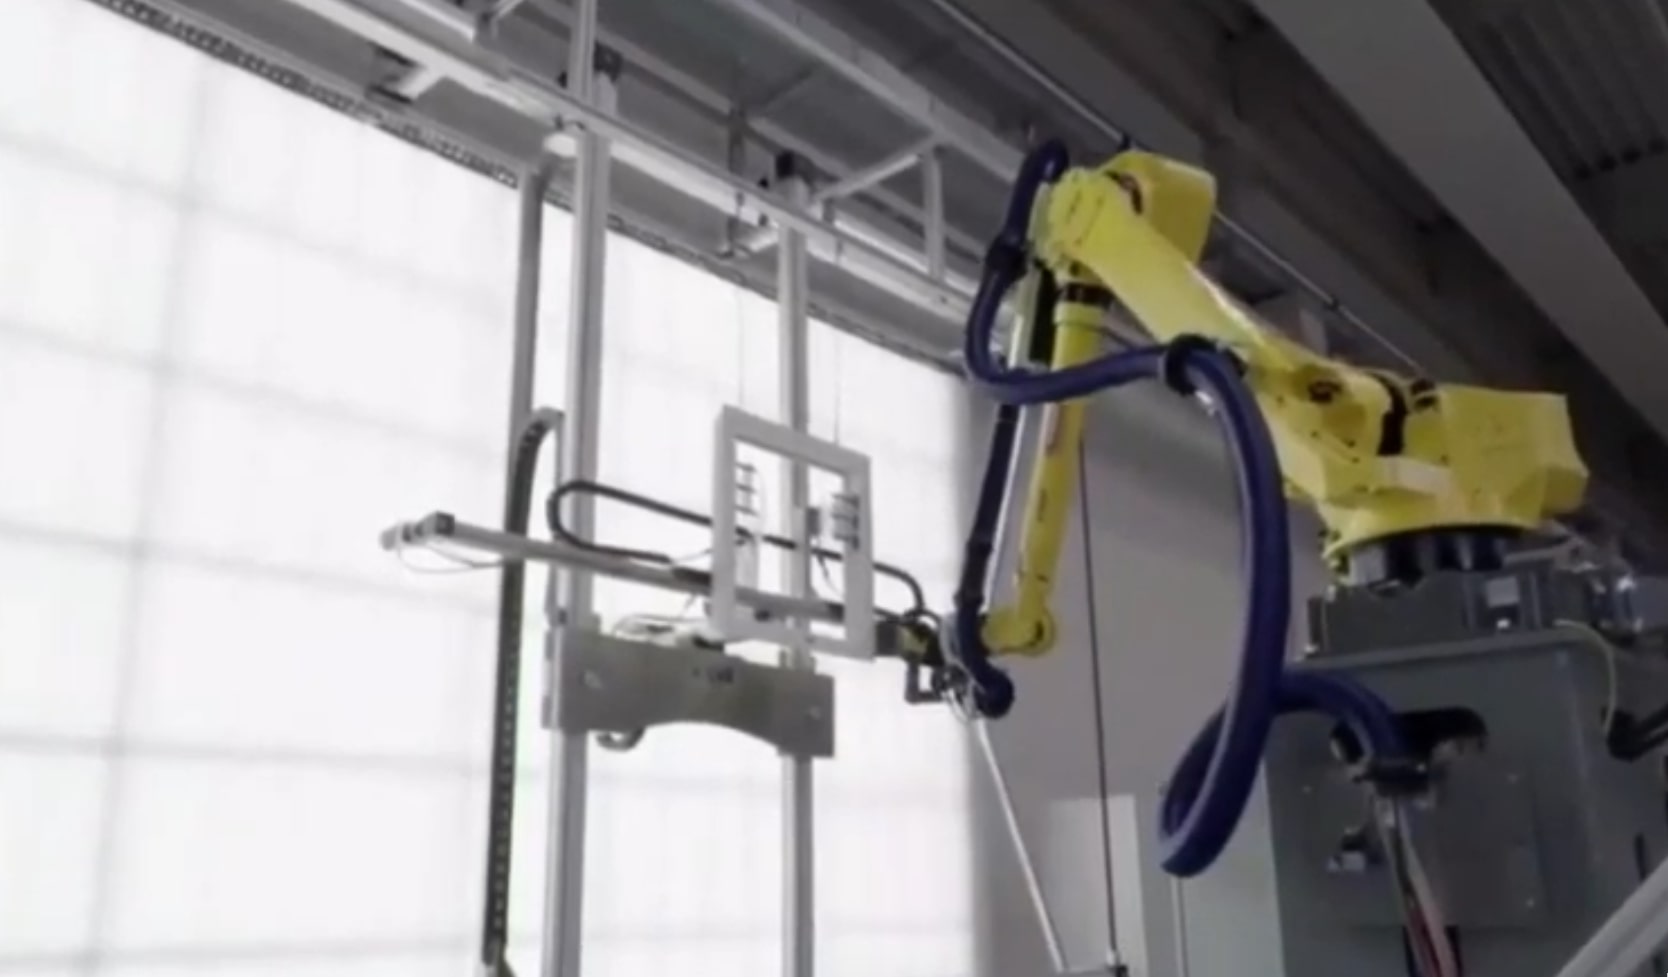 automated sanding of wodden windows with fanuc robots - automatically programmed with AUTOMAPPPS software